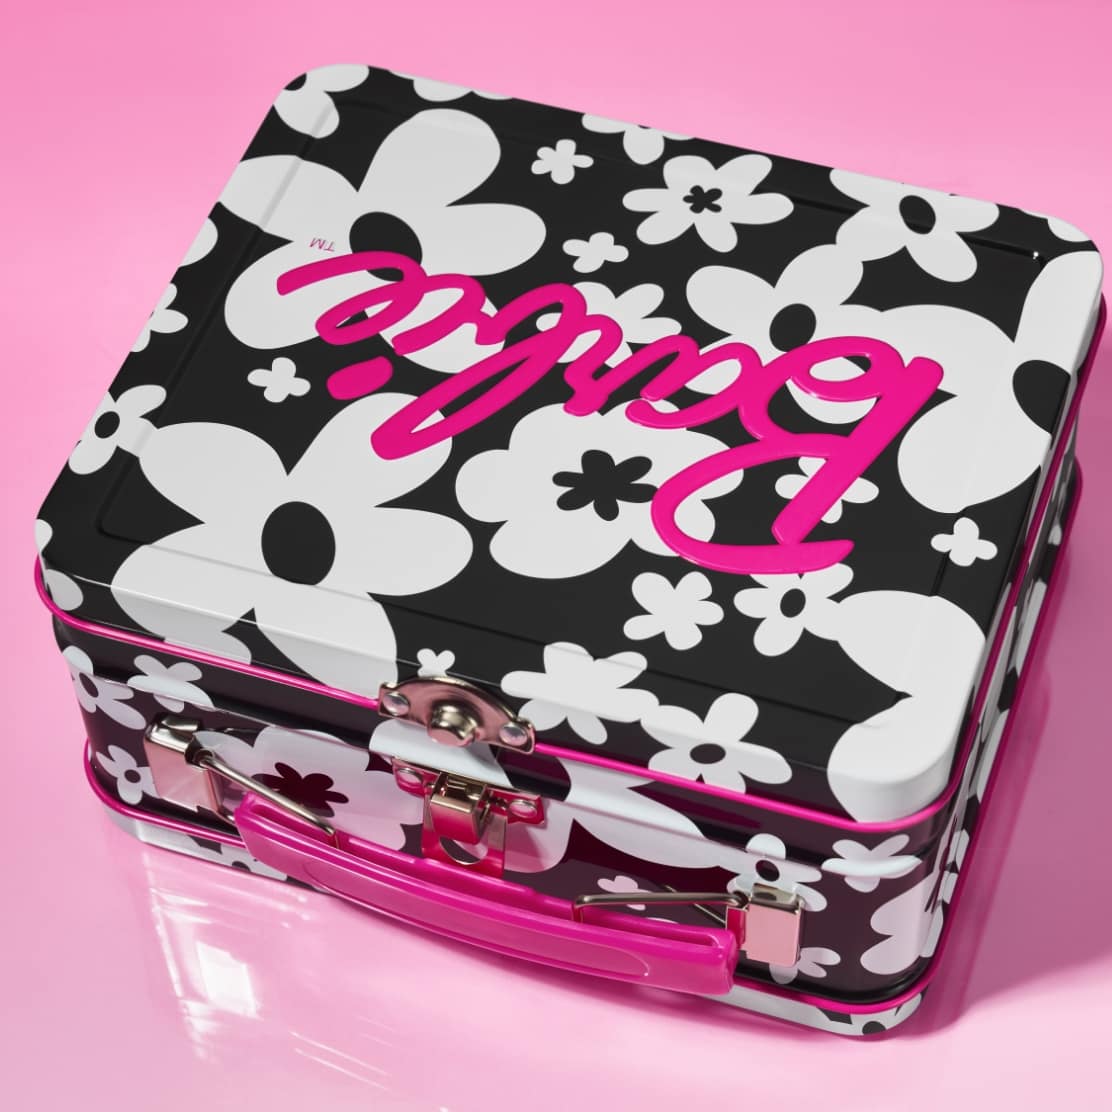 Image one. A lunchbox-inspired Barbie tin featuring a graphic black-and-white floral print with hot pink accents.